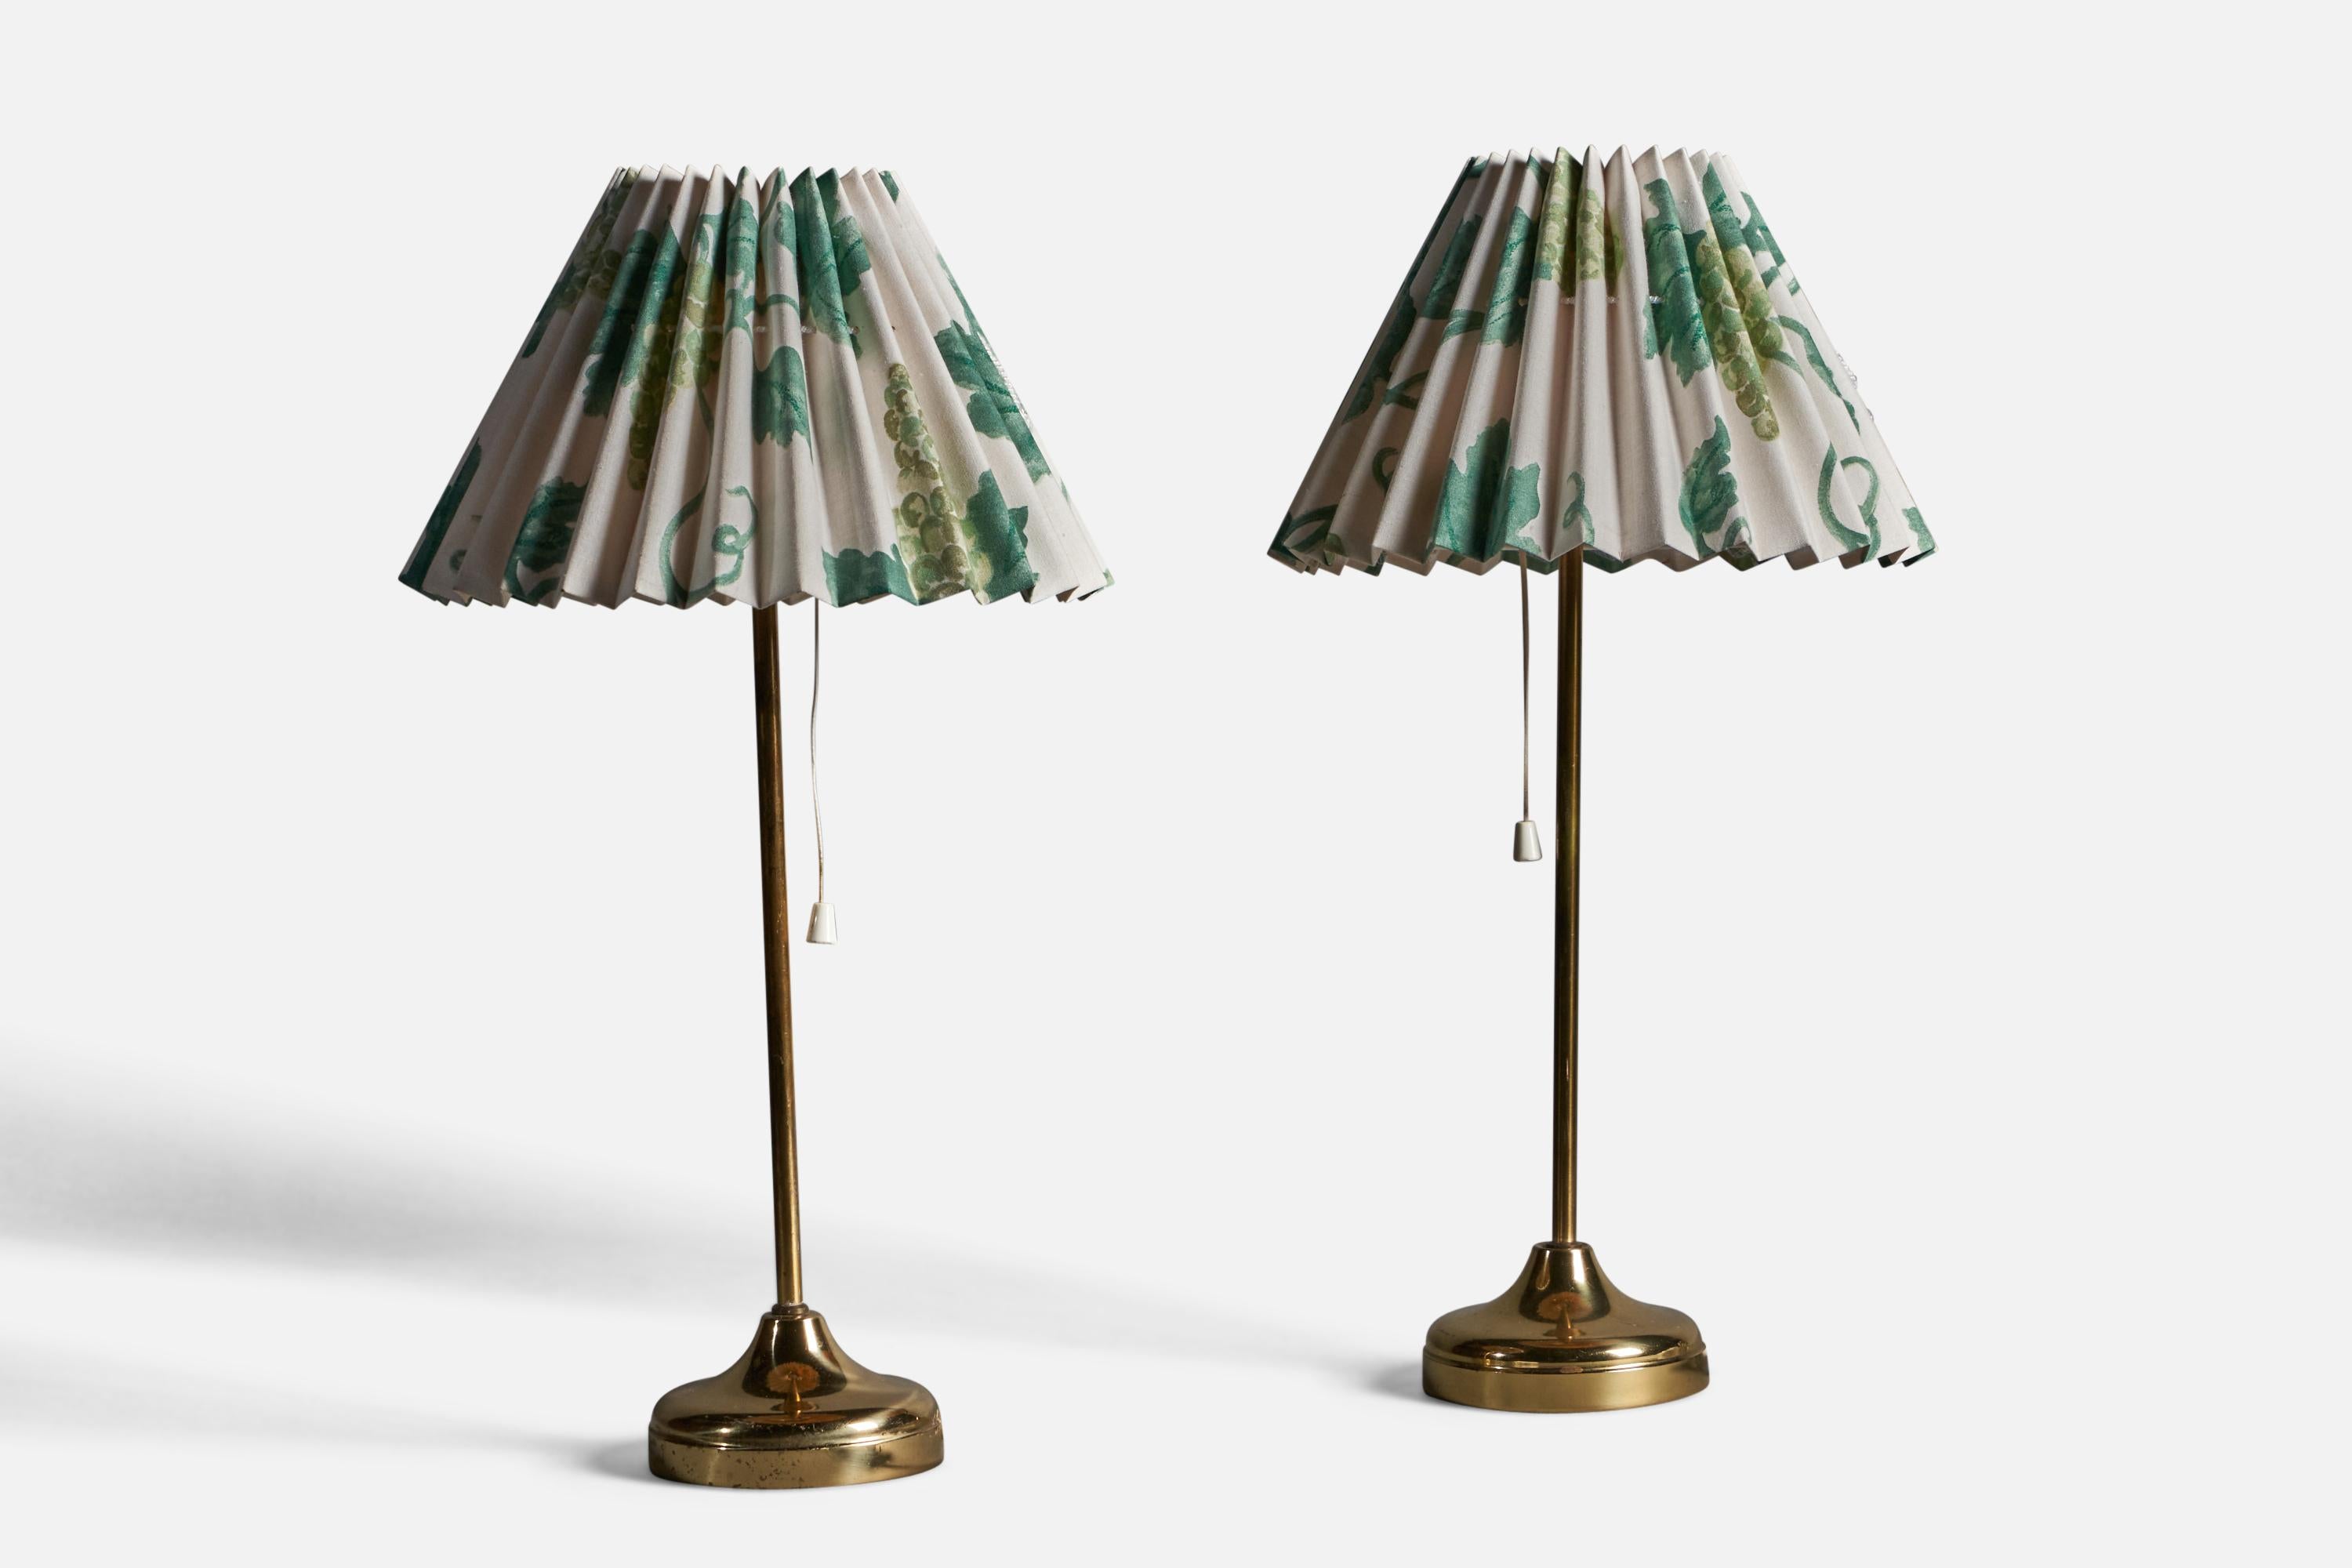 A pair of brass and floral printed fabric table lamps designed and produced by Nafa, Sweden, 1960s.

Overall Dimensions (inches): 18.75